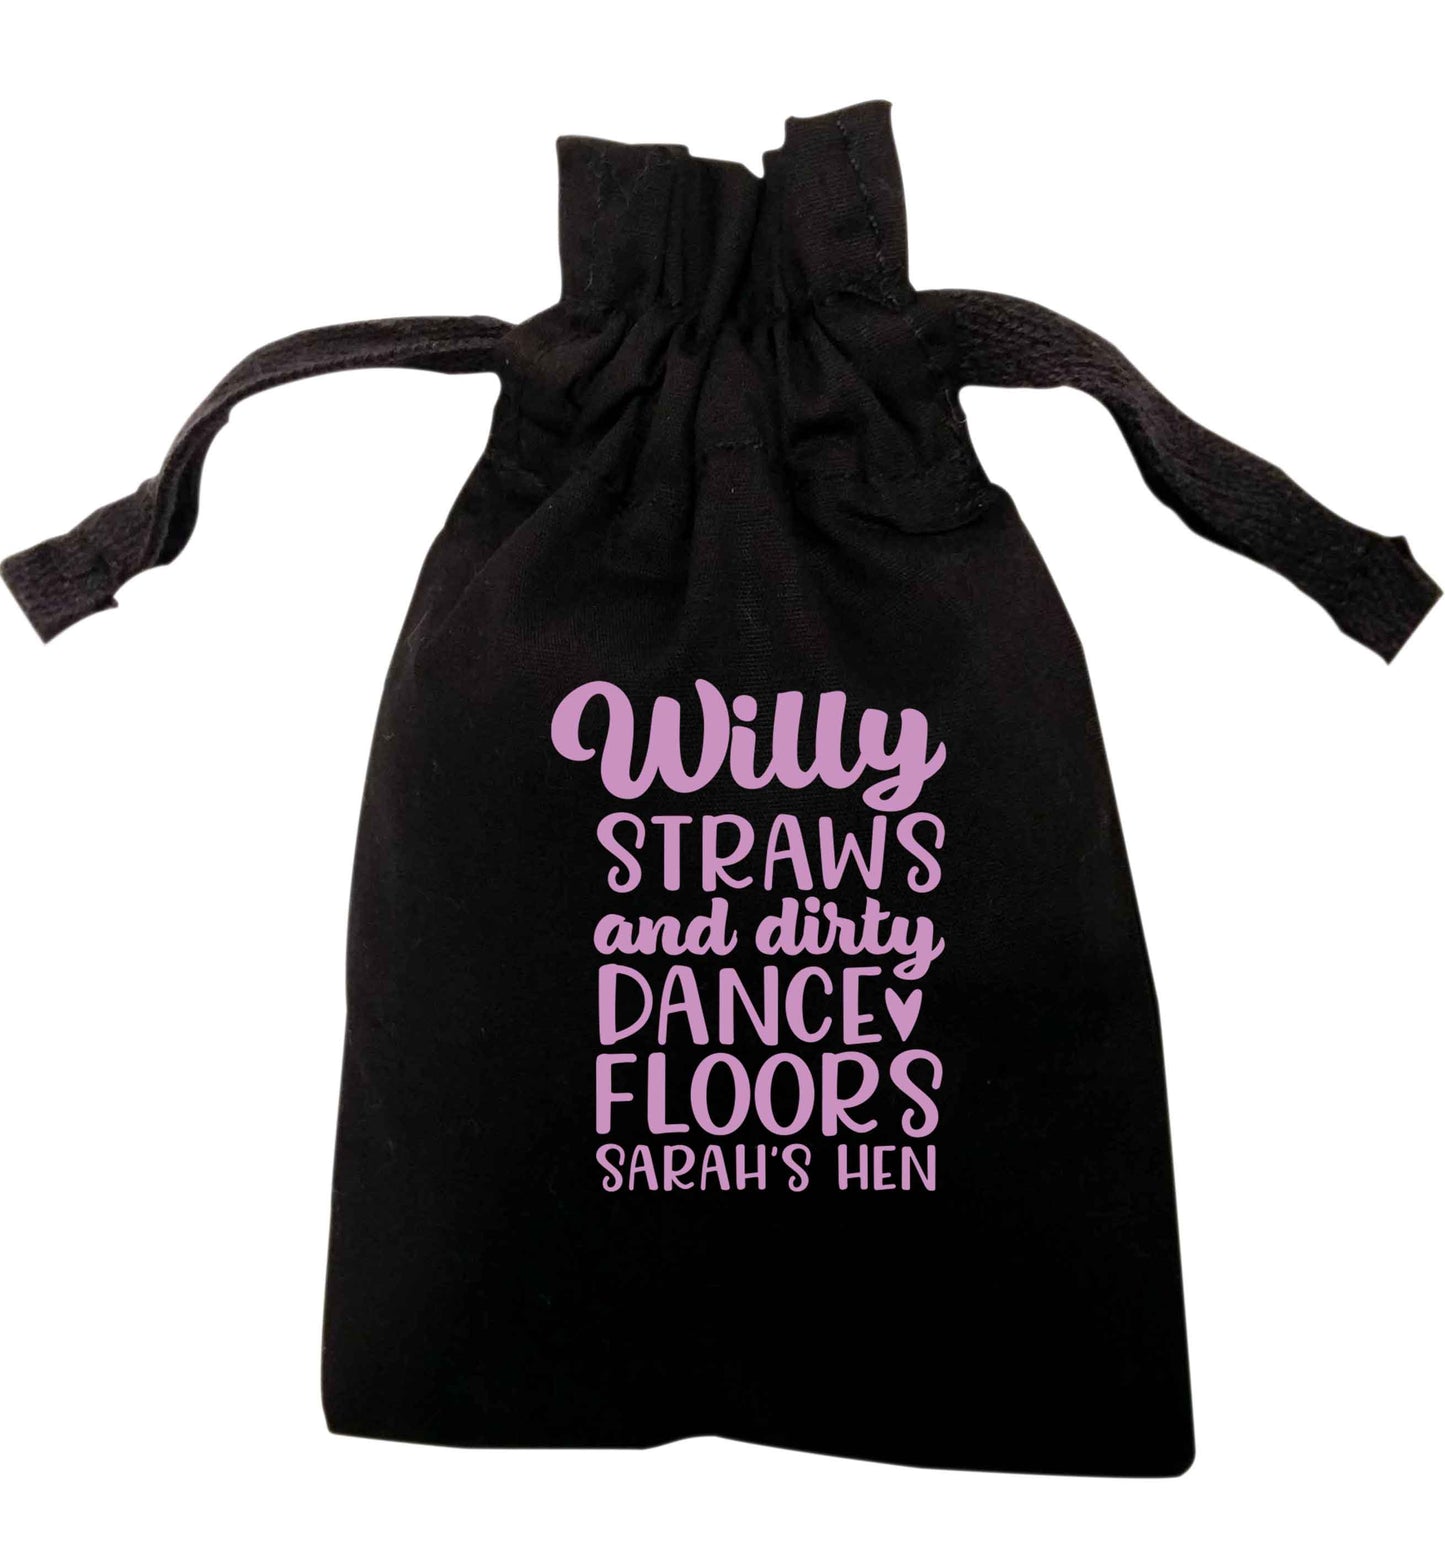 Willy straws and dirty dance floors | XS - L | Pouch / Drawstring bag / Sack | Organic Cotton | Bulk discounts available!